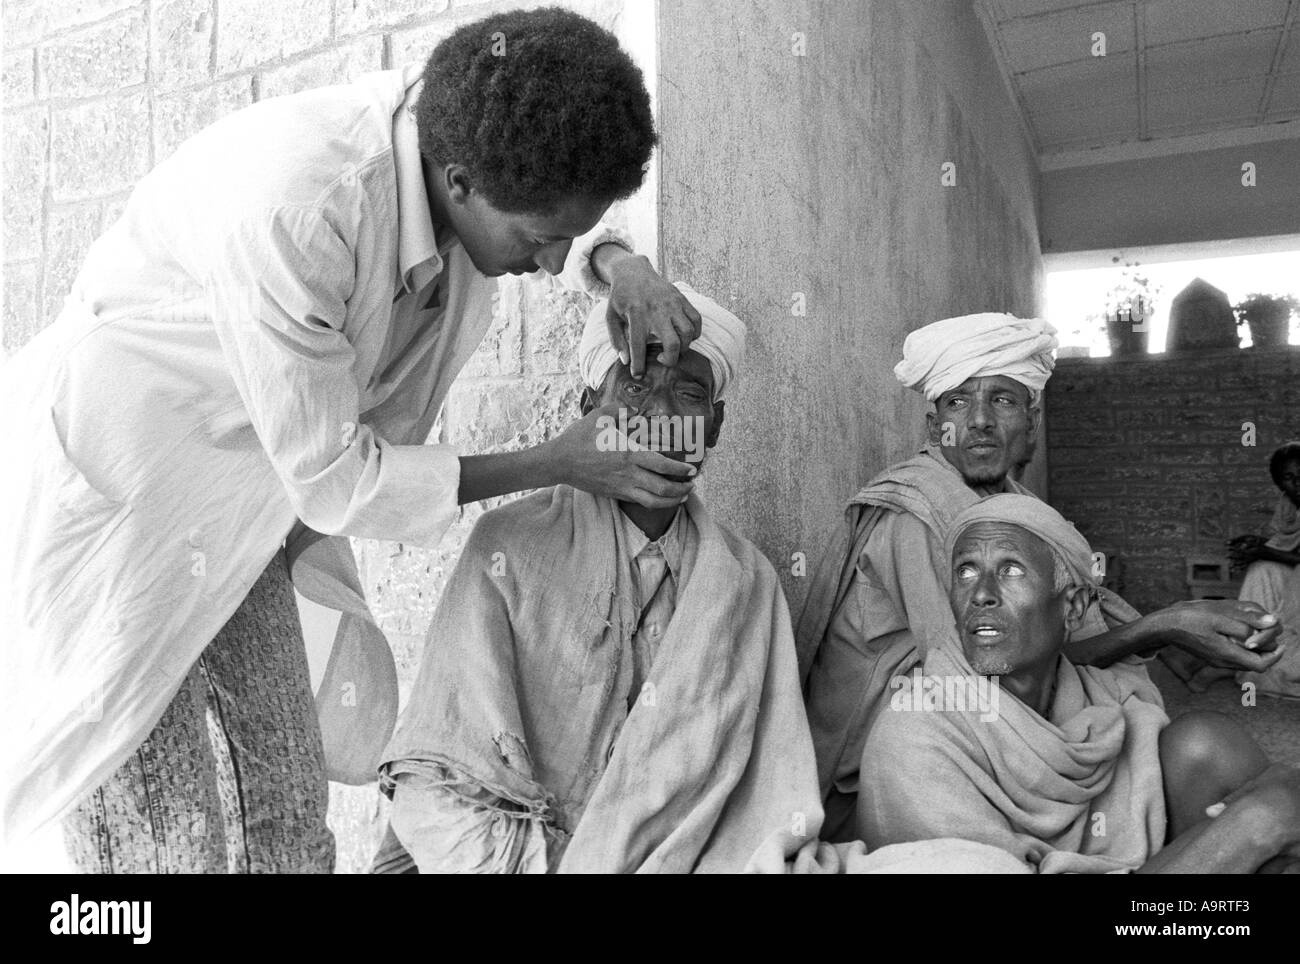 B/W of a doctor examining local men at an eye clinic. Mekelle, Tigray, Ethiopia Stock Photo